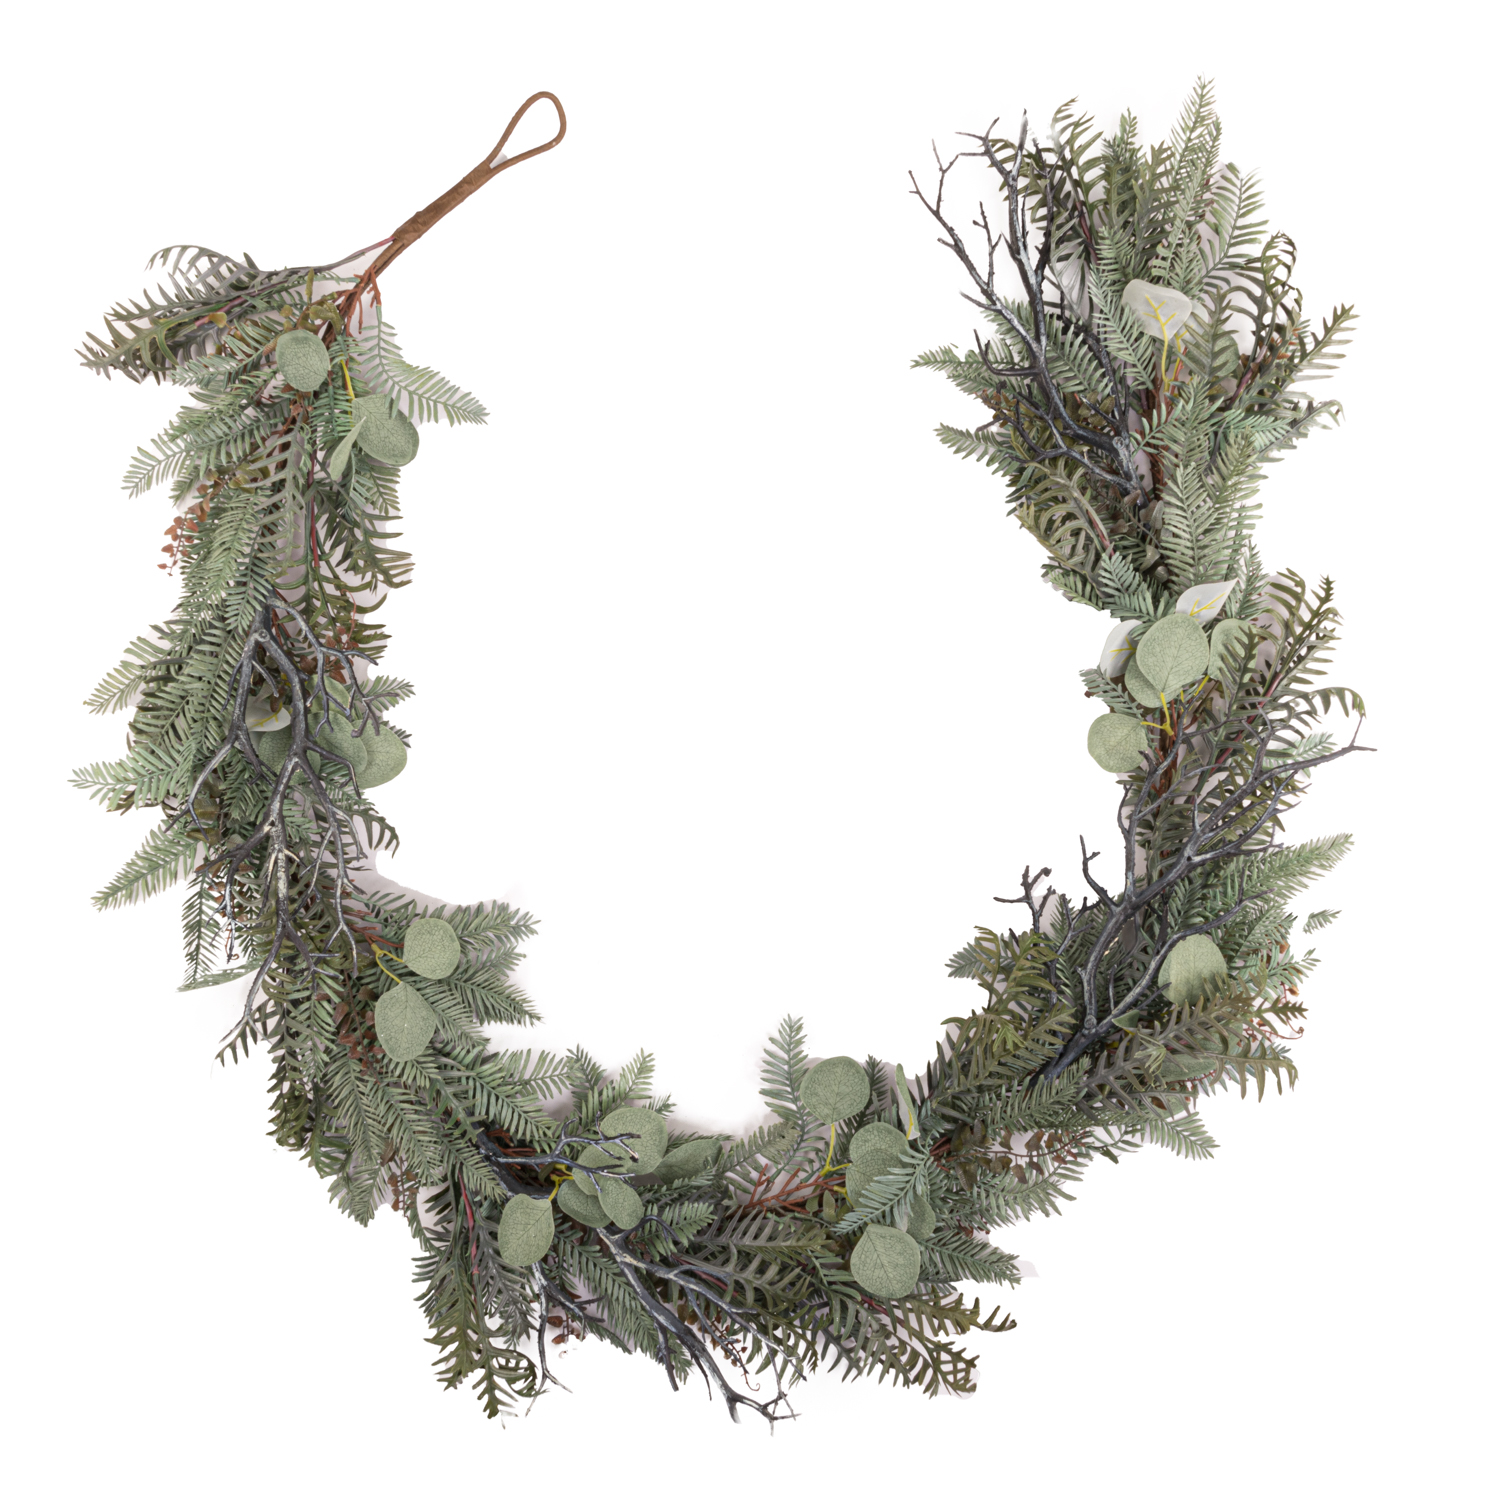 Winter Garland With Eucalyptus And Fern - Image 1